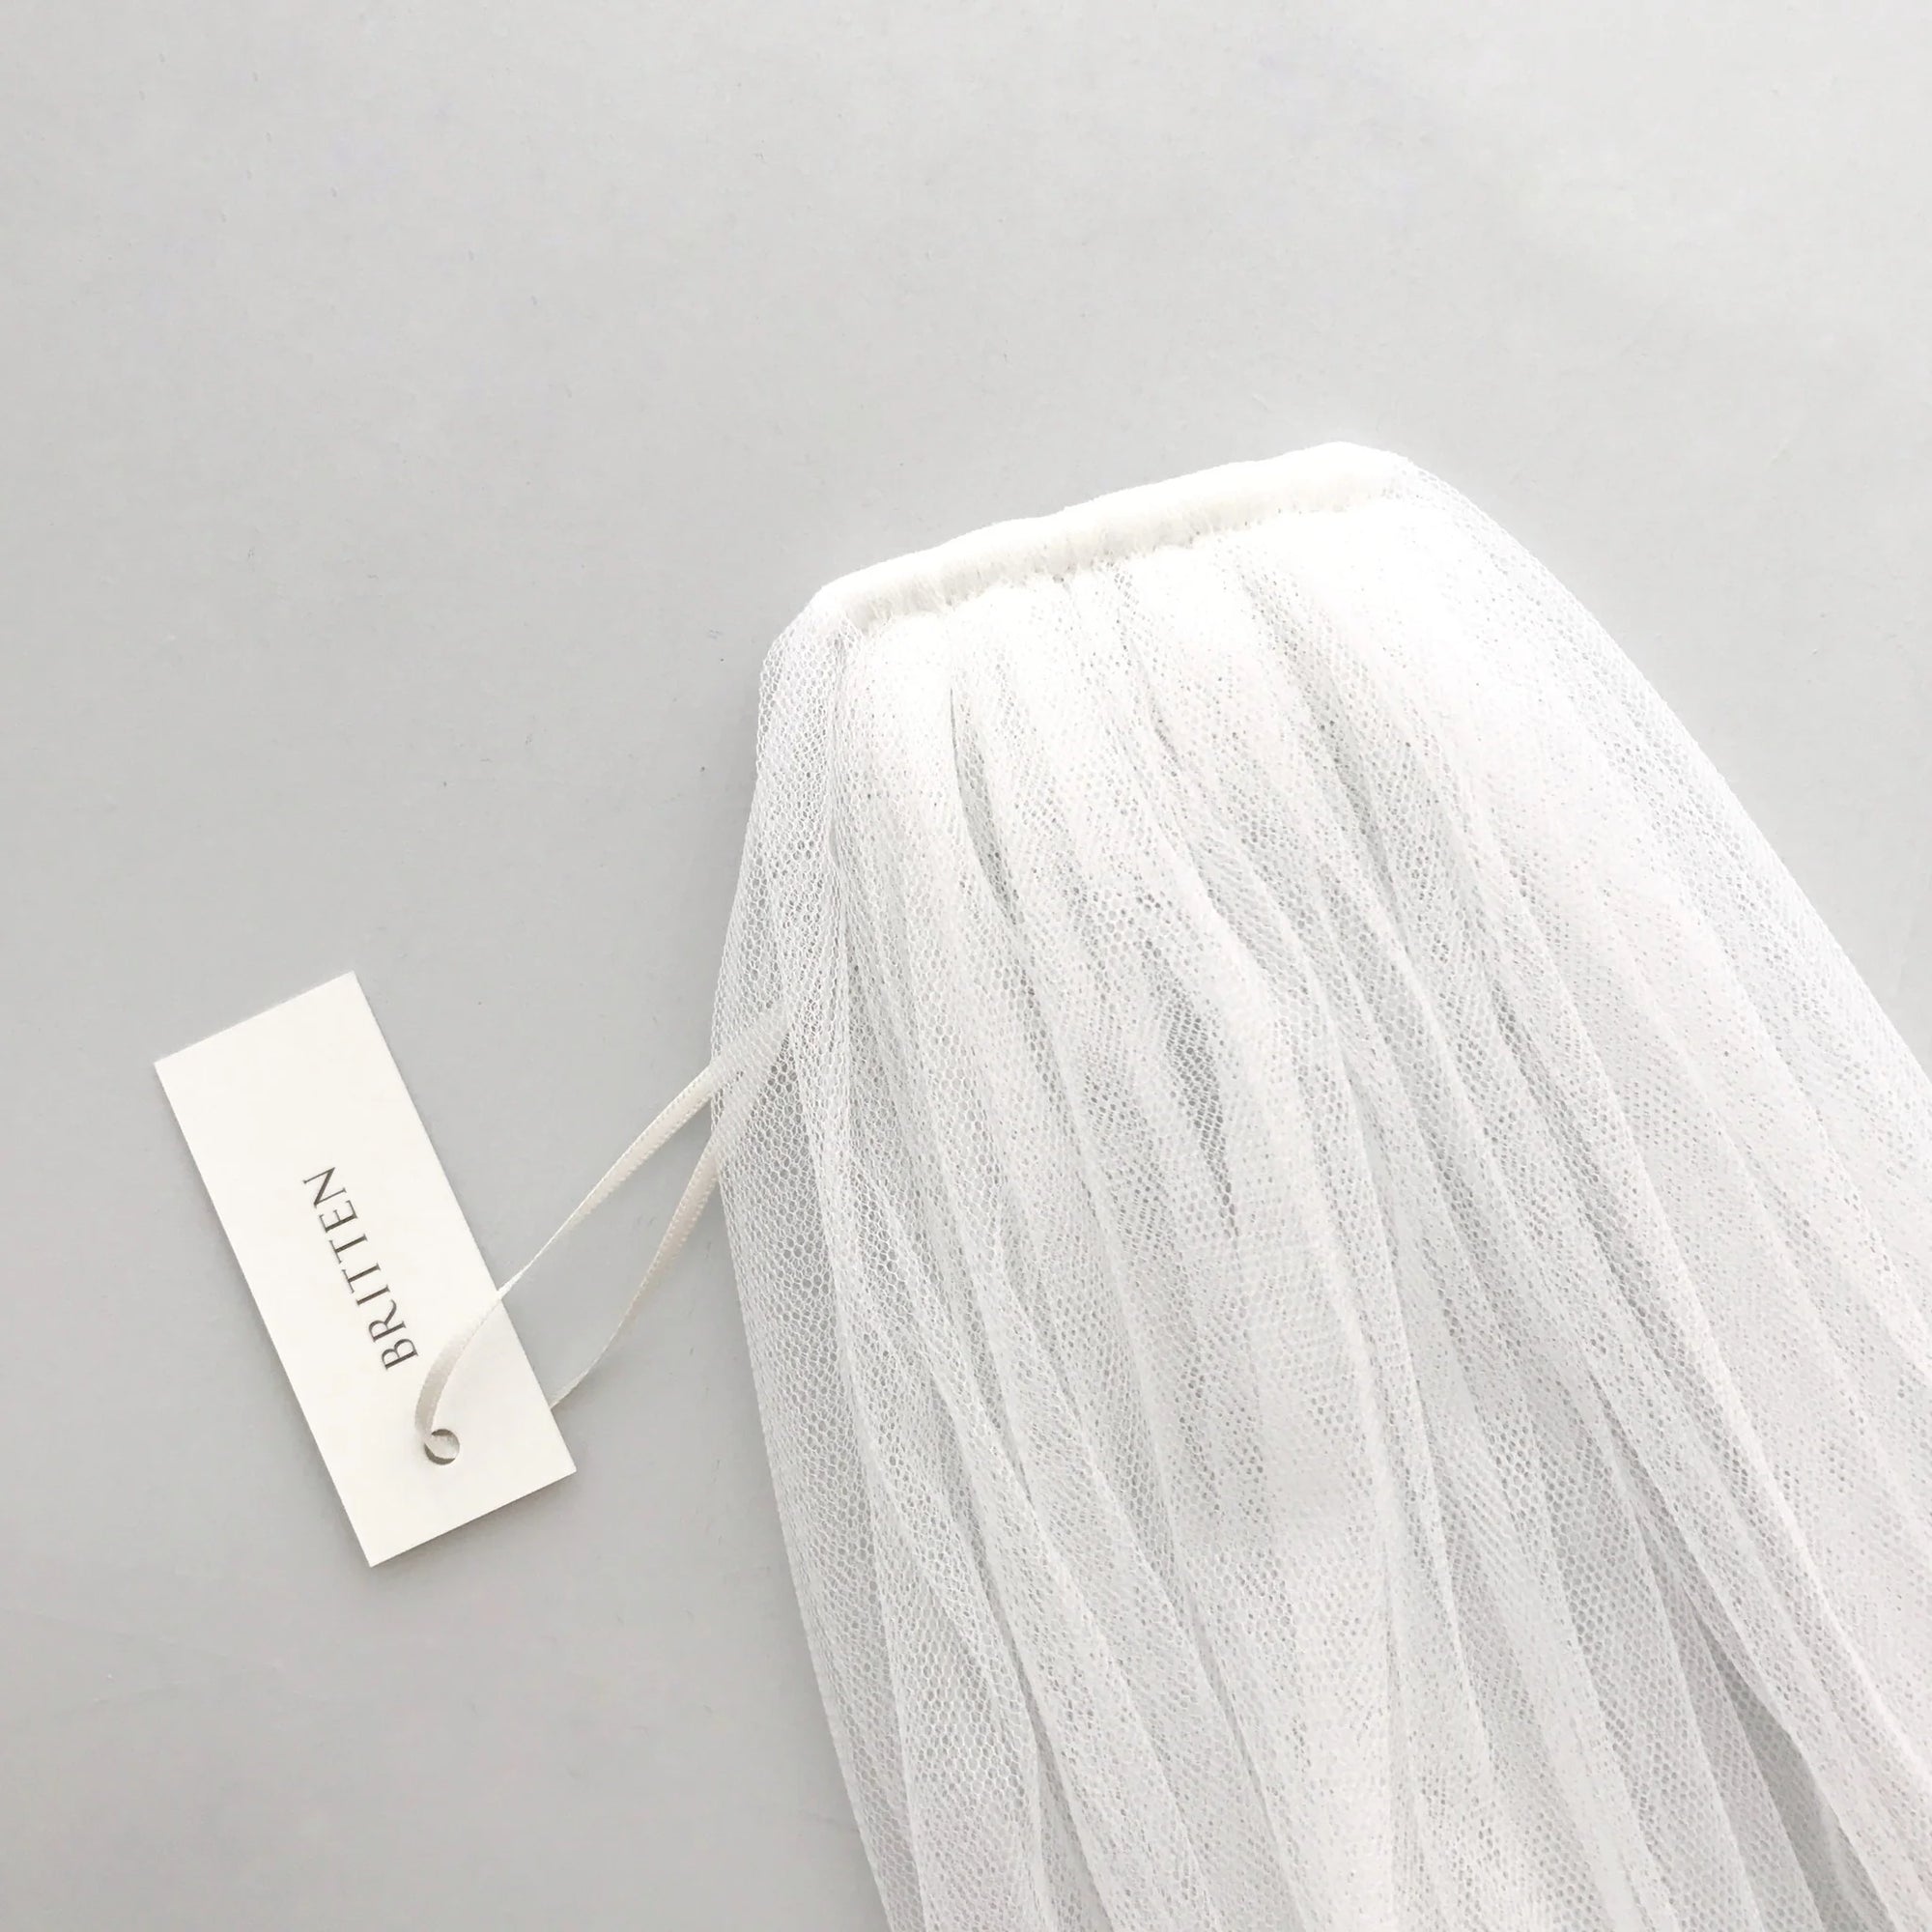 What are the combs like on your classic wedding veils?